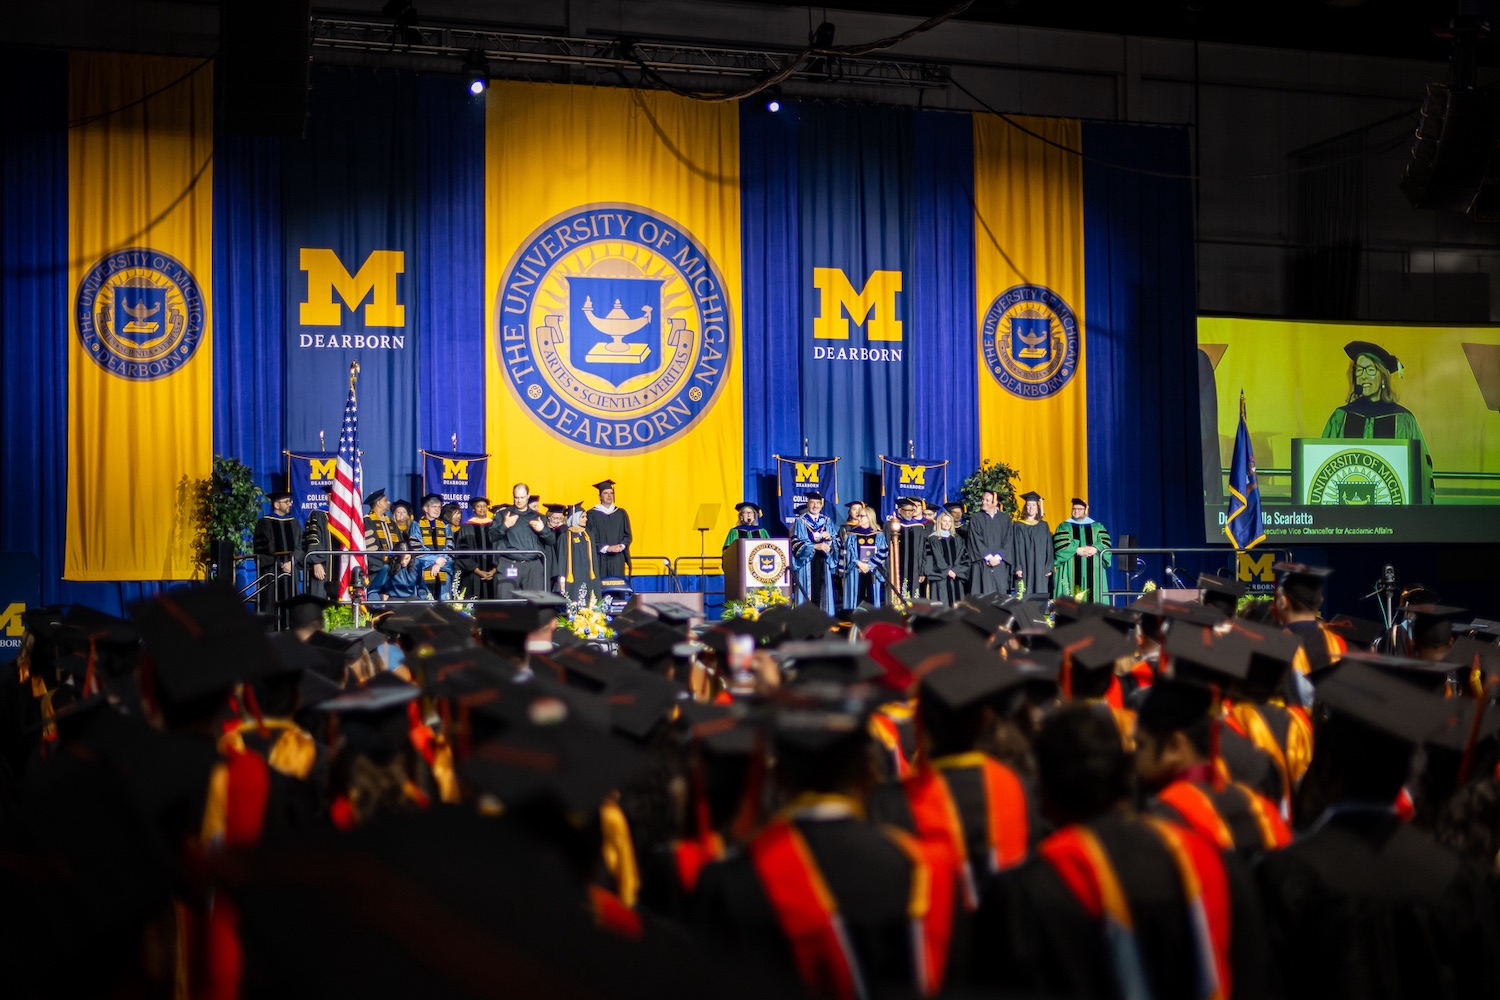 Commencement stage at UM-Dearborn